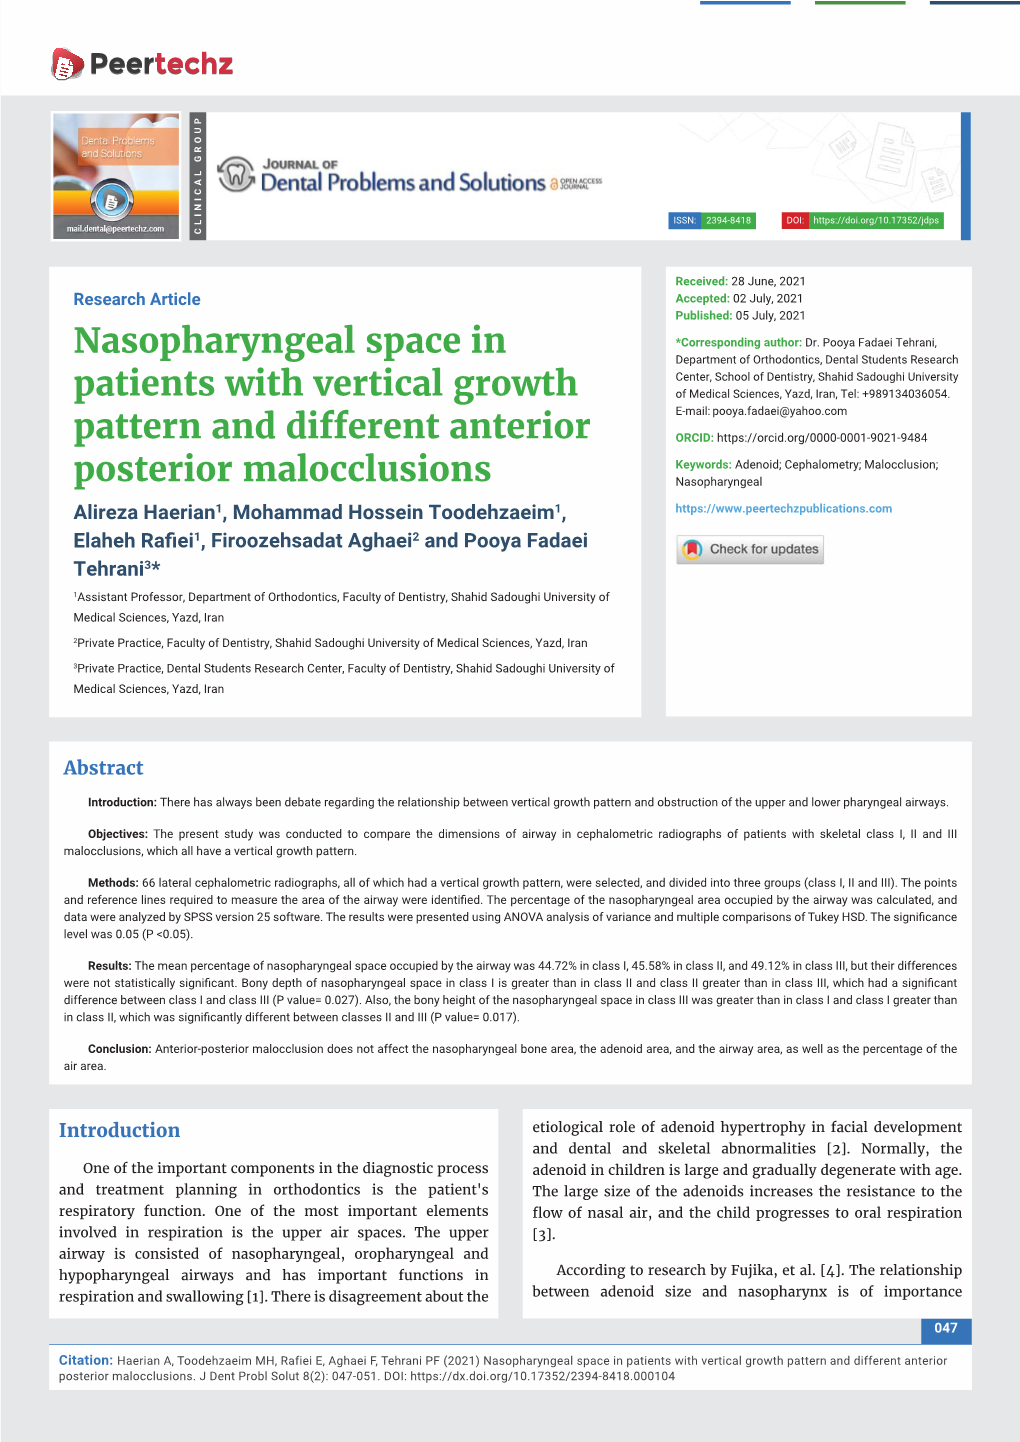 Nasopharyngeal Space in Patients with Vertical Growth Pattern and Different Anterior Posterior Malocclusions